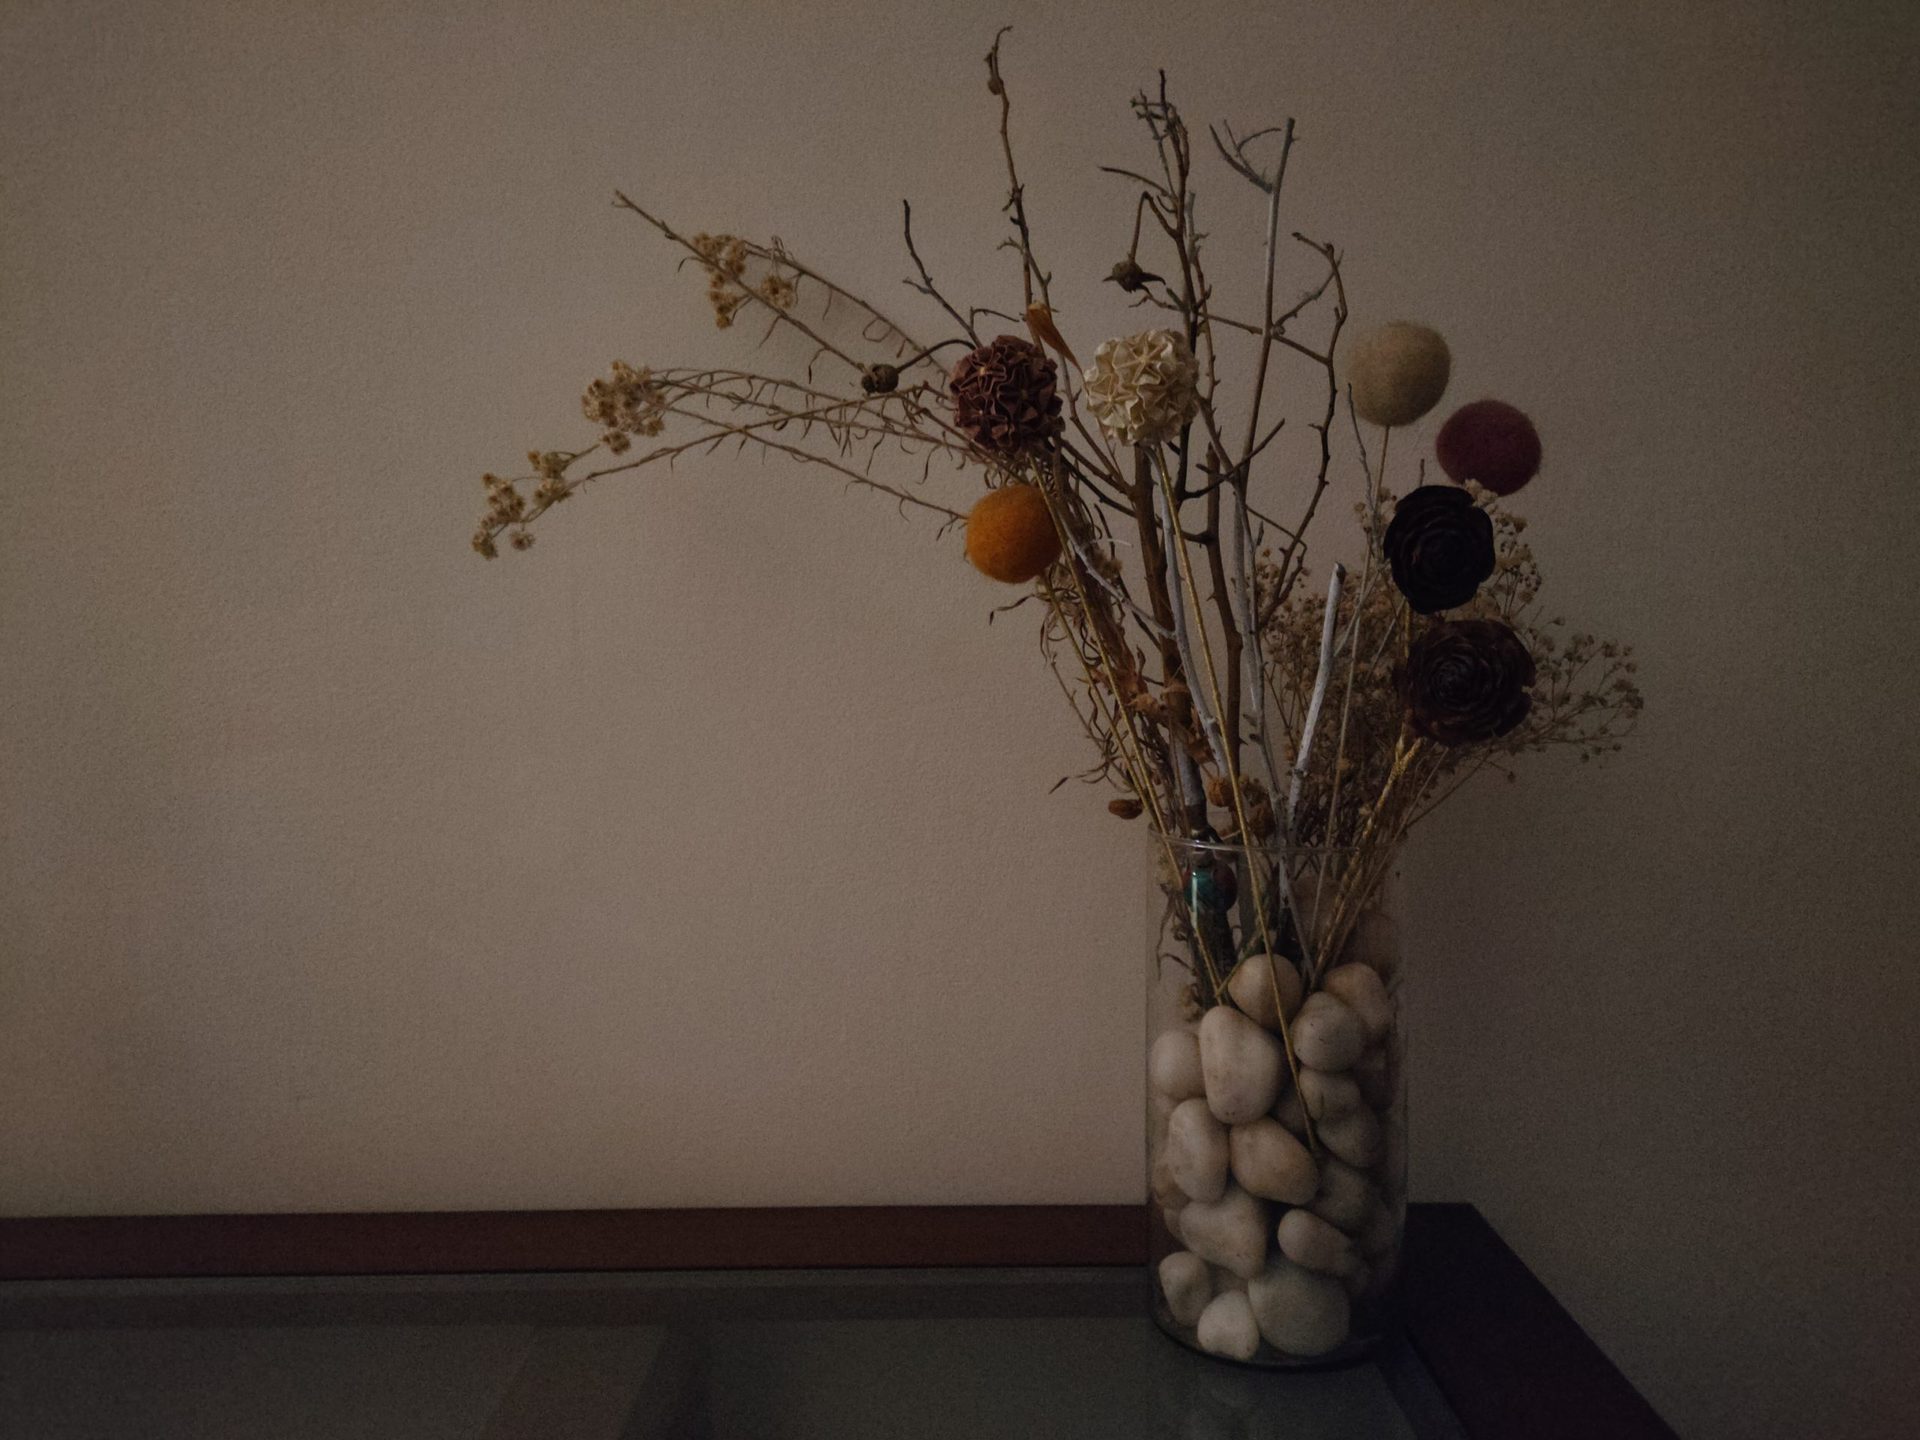 Realme GT low light shot of dried grasses and flowers in a vase with pebbles.